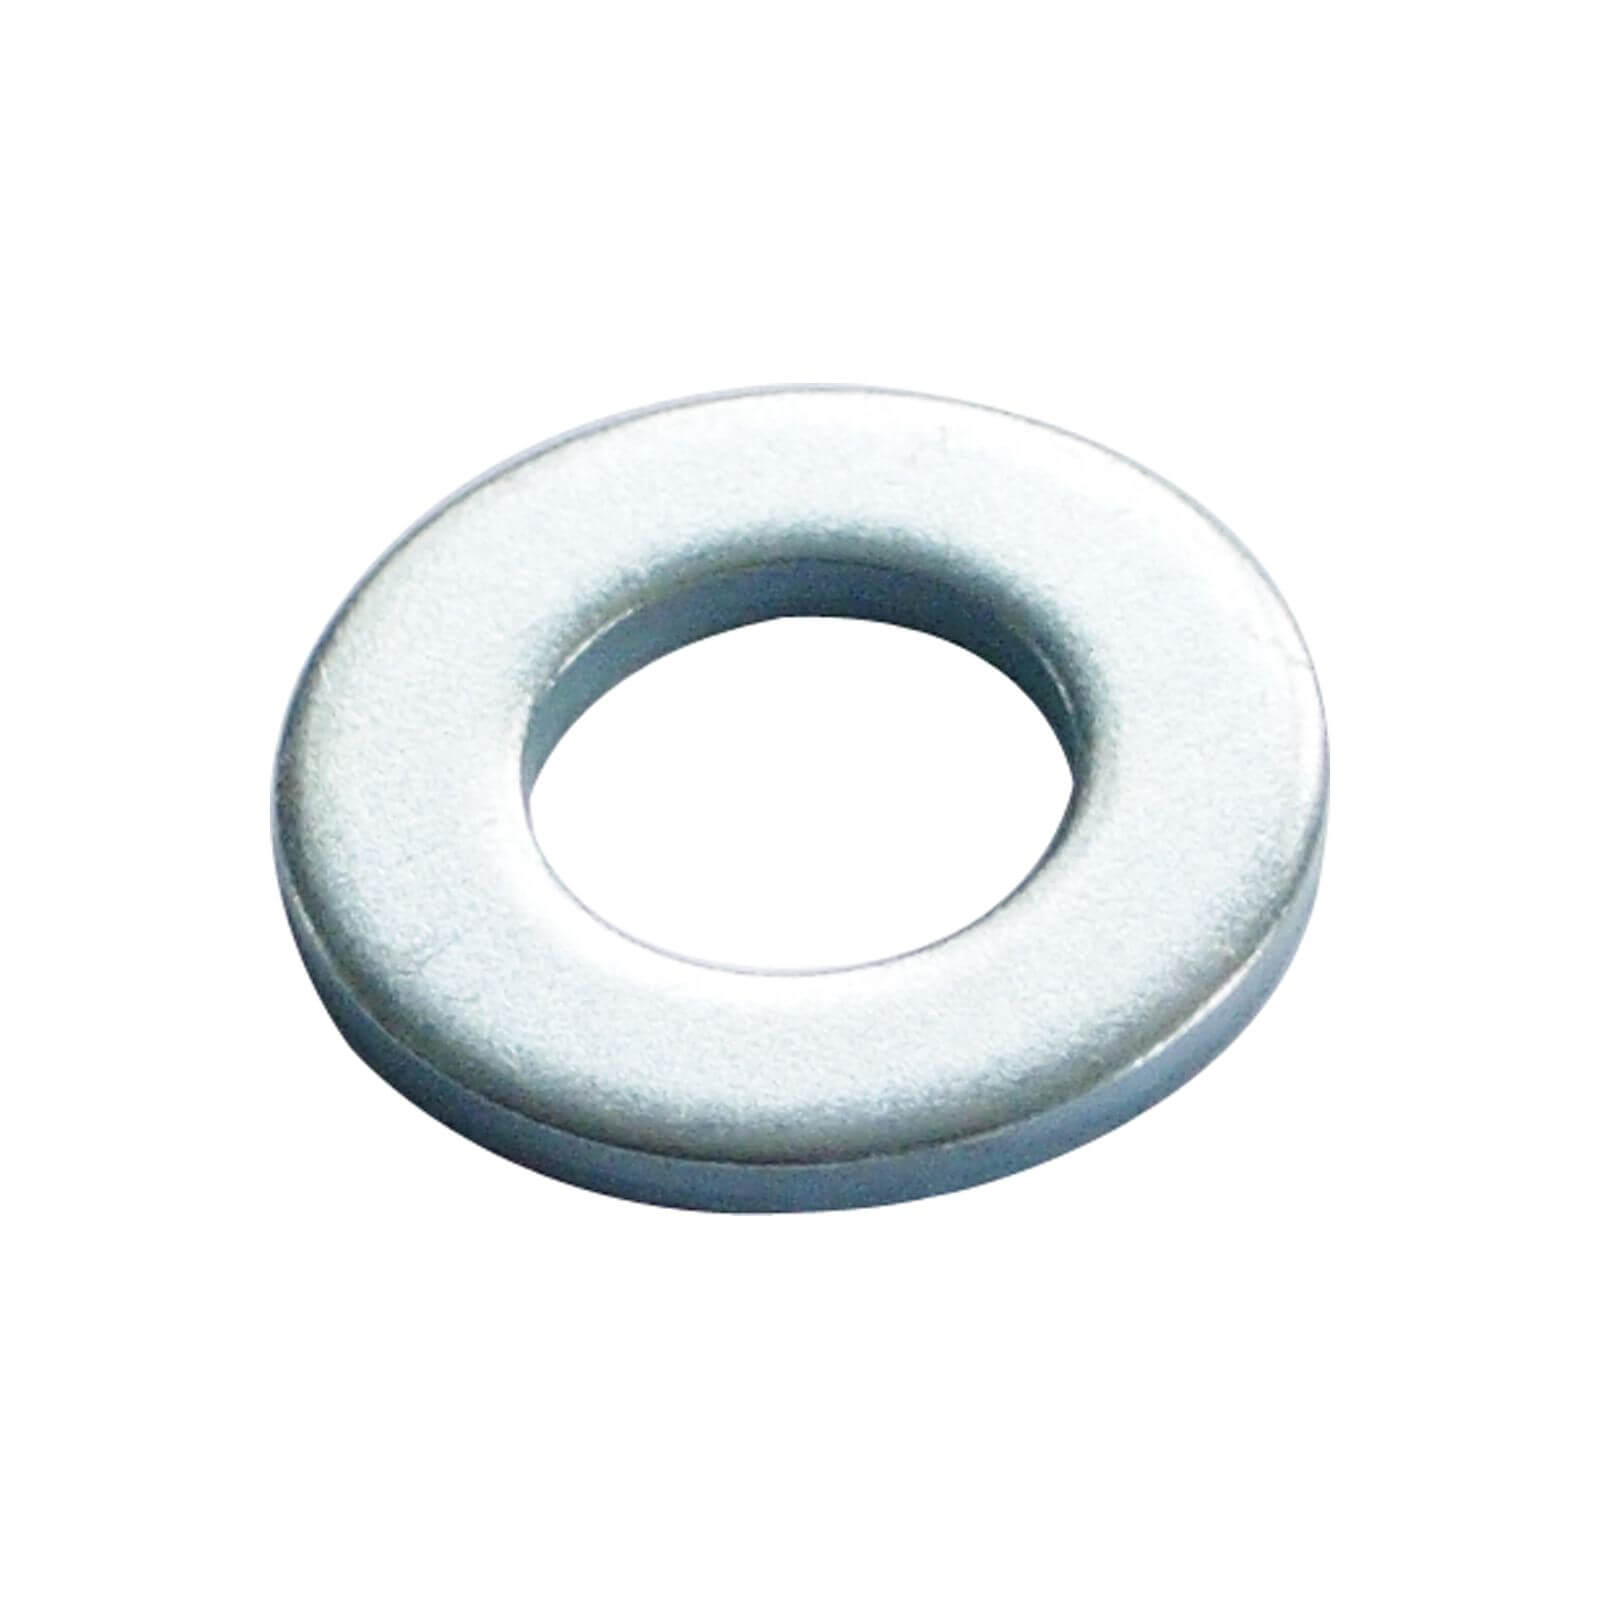 Washer - Bright Zinc Plated - M12 - 15 Pack